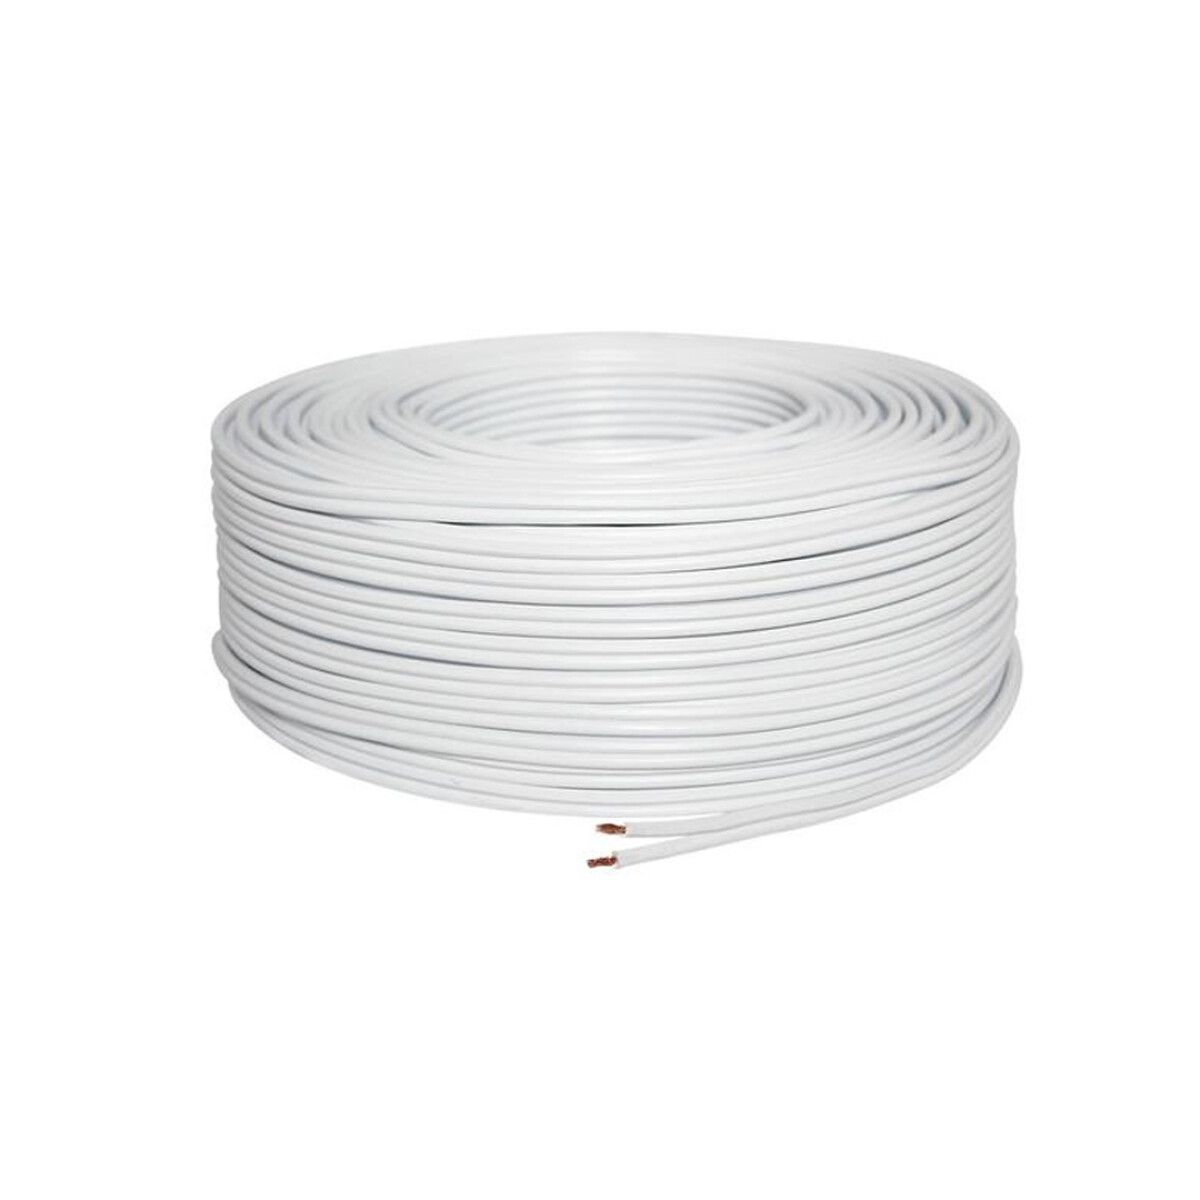 Cable Gemelo - 2 mm Blanco 